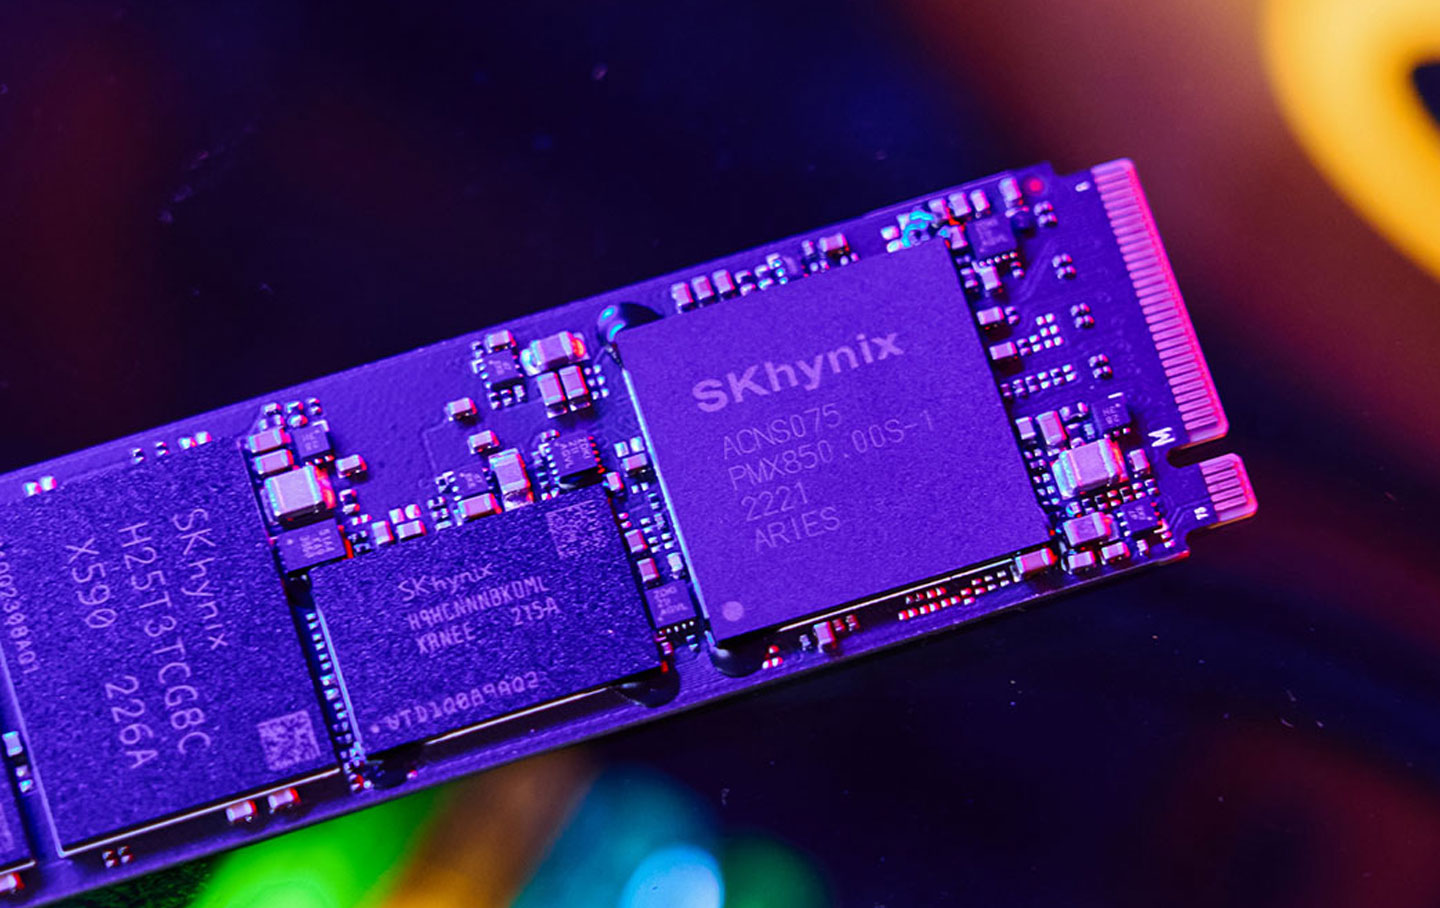 The DRAM is also the LPDDR4-4266 specification manufactured by SK hynix, and the controller is also SK hynix's own ACNS075, which supports four-lane PCIe 4.0 x4 interface and NVMe 1.4 transmission protocol.